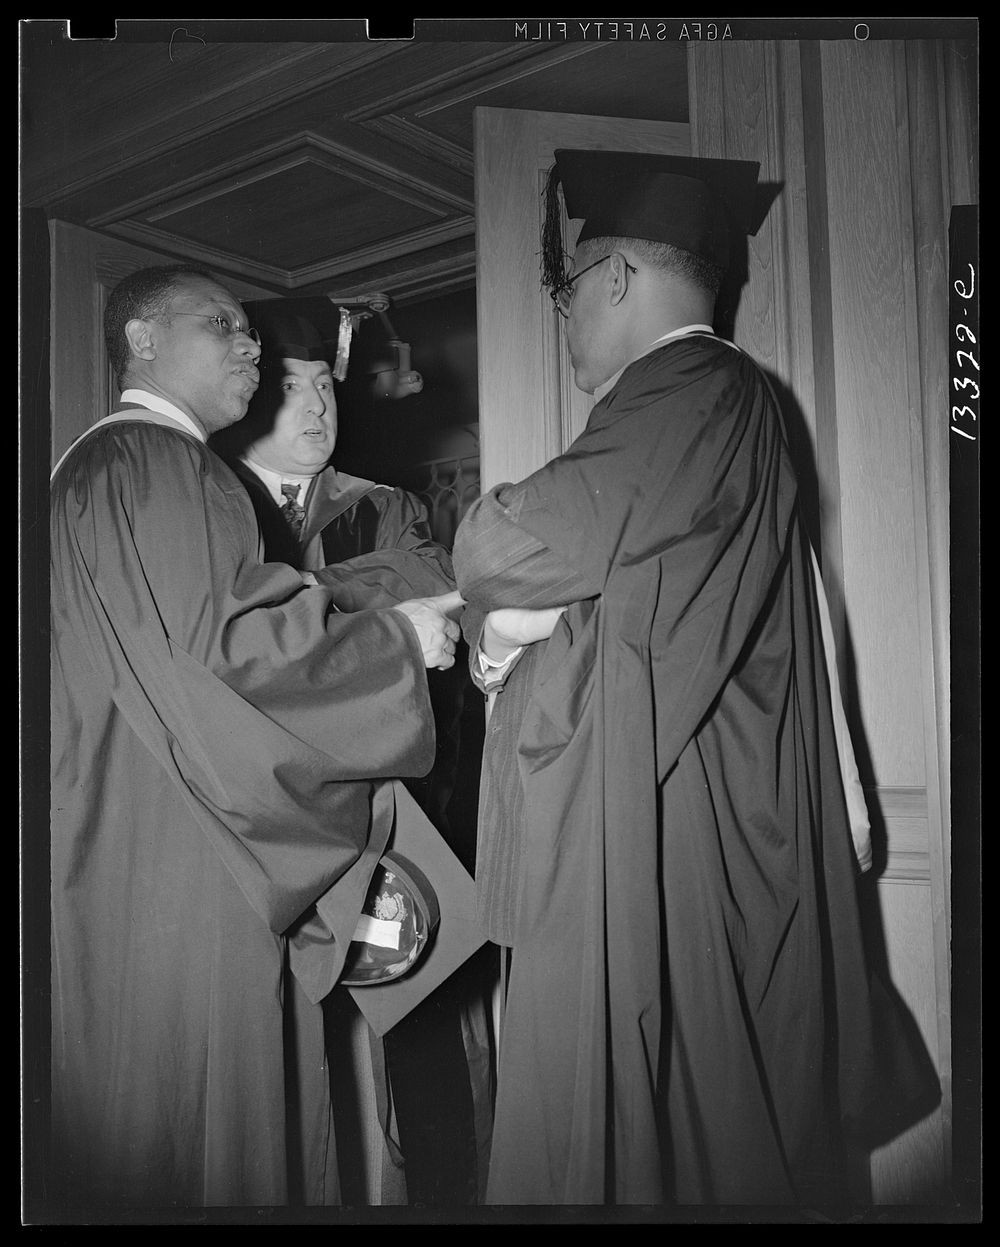 Washington, D.C. Faculty members of the Howard University during commencement. Sourced from the Library of Congress.